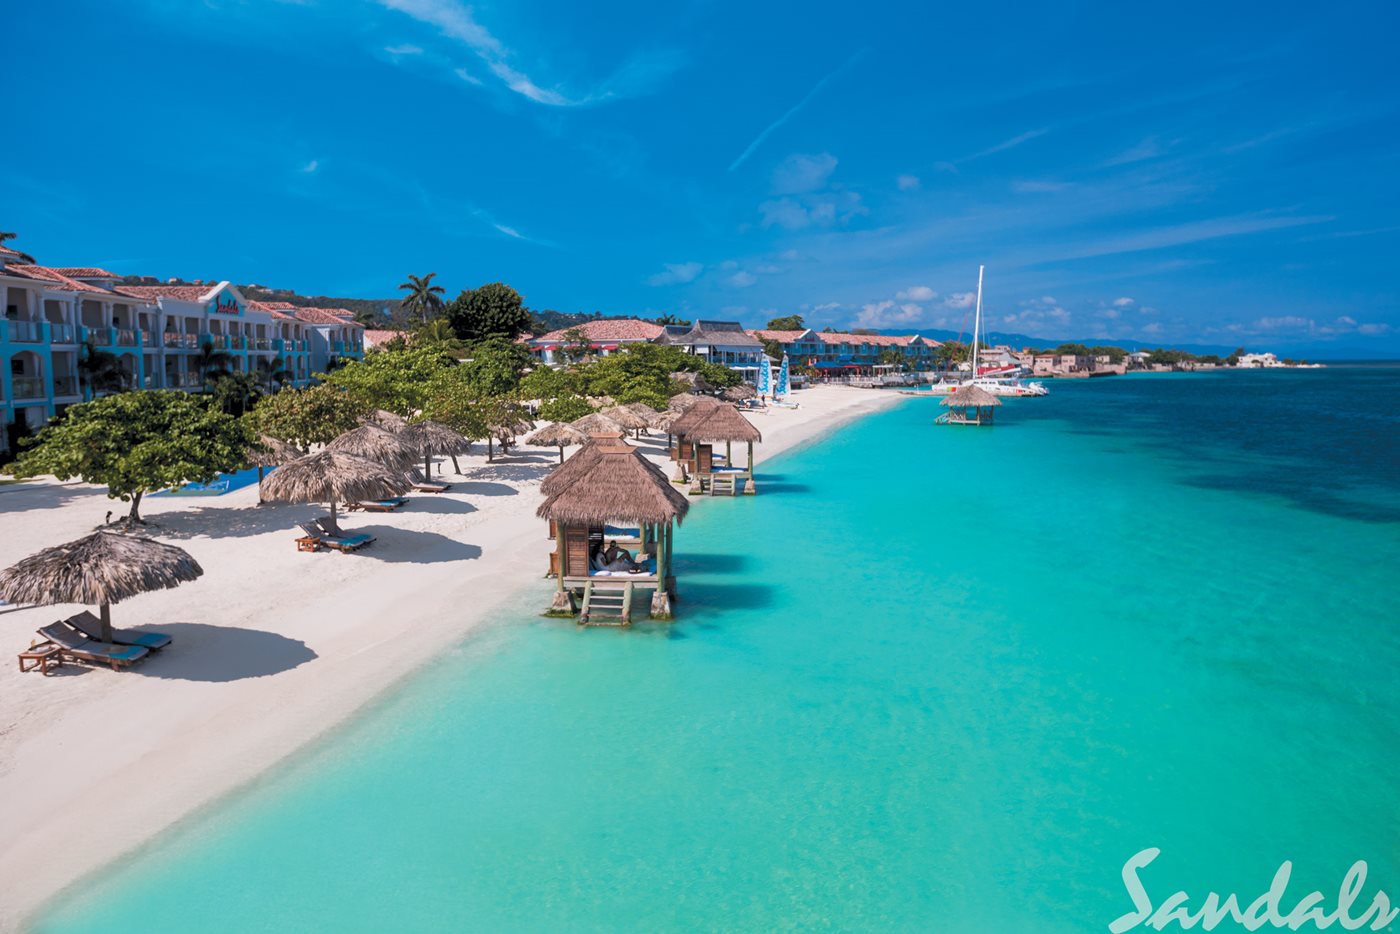 Activities and excursions - Sandals Montego Bay - Montego Bay | Transat